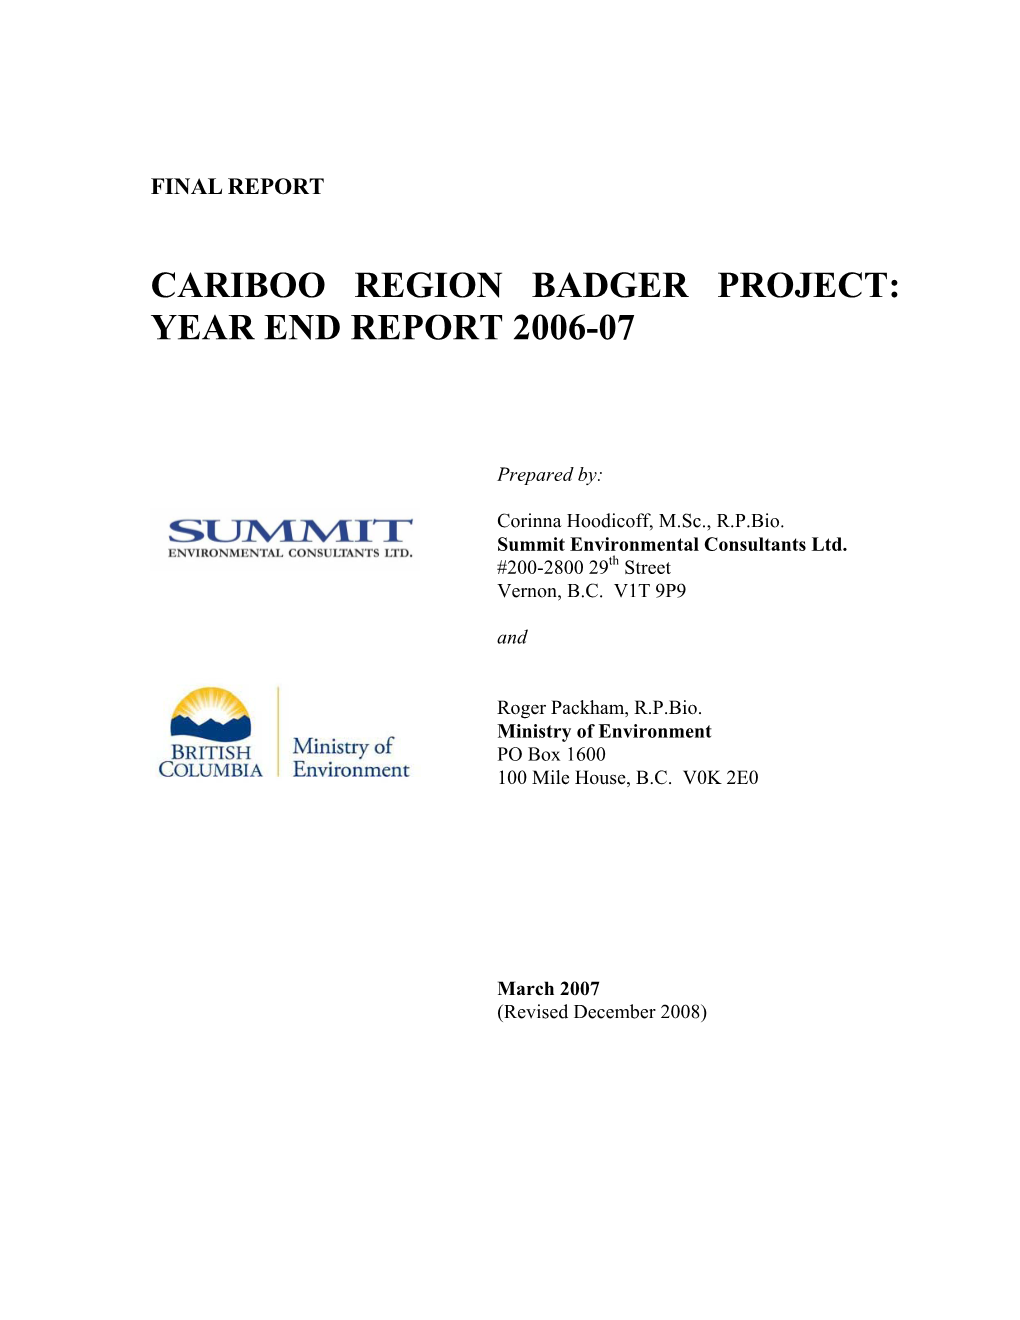 Cariboo Region Badger Project: Year End Report 2006-07